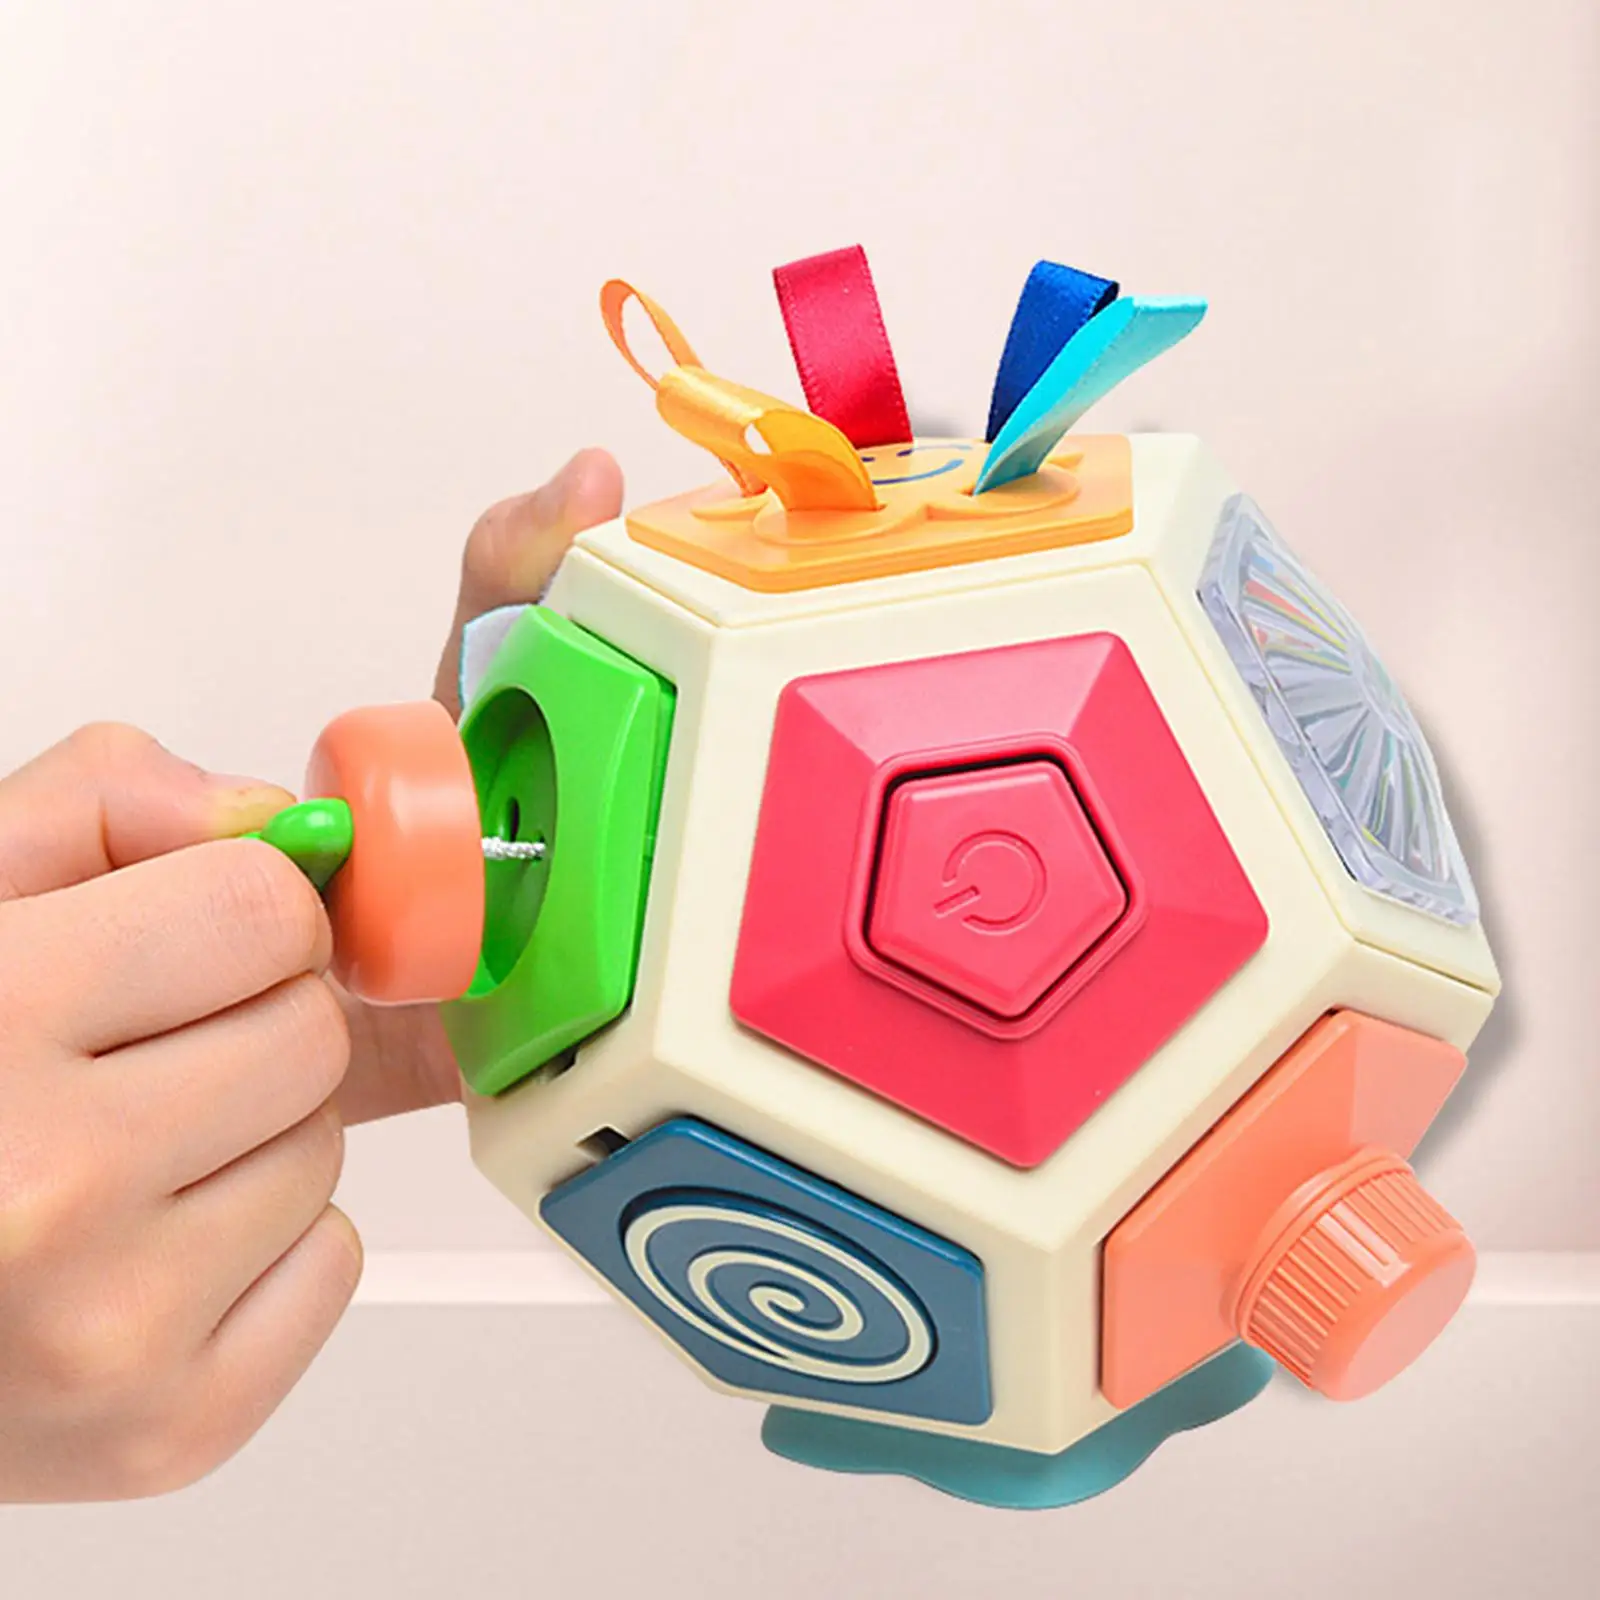 Sensory Busy Ball Fine Motor Skills Early Education Grip Ball Toy Puzzle Hand The Ball for Children Car Airplane Toy Newborn